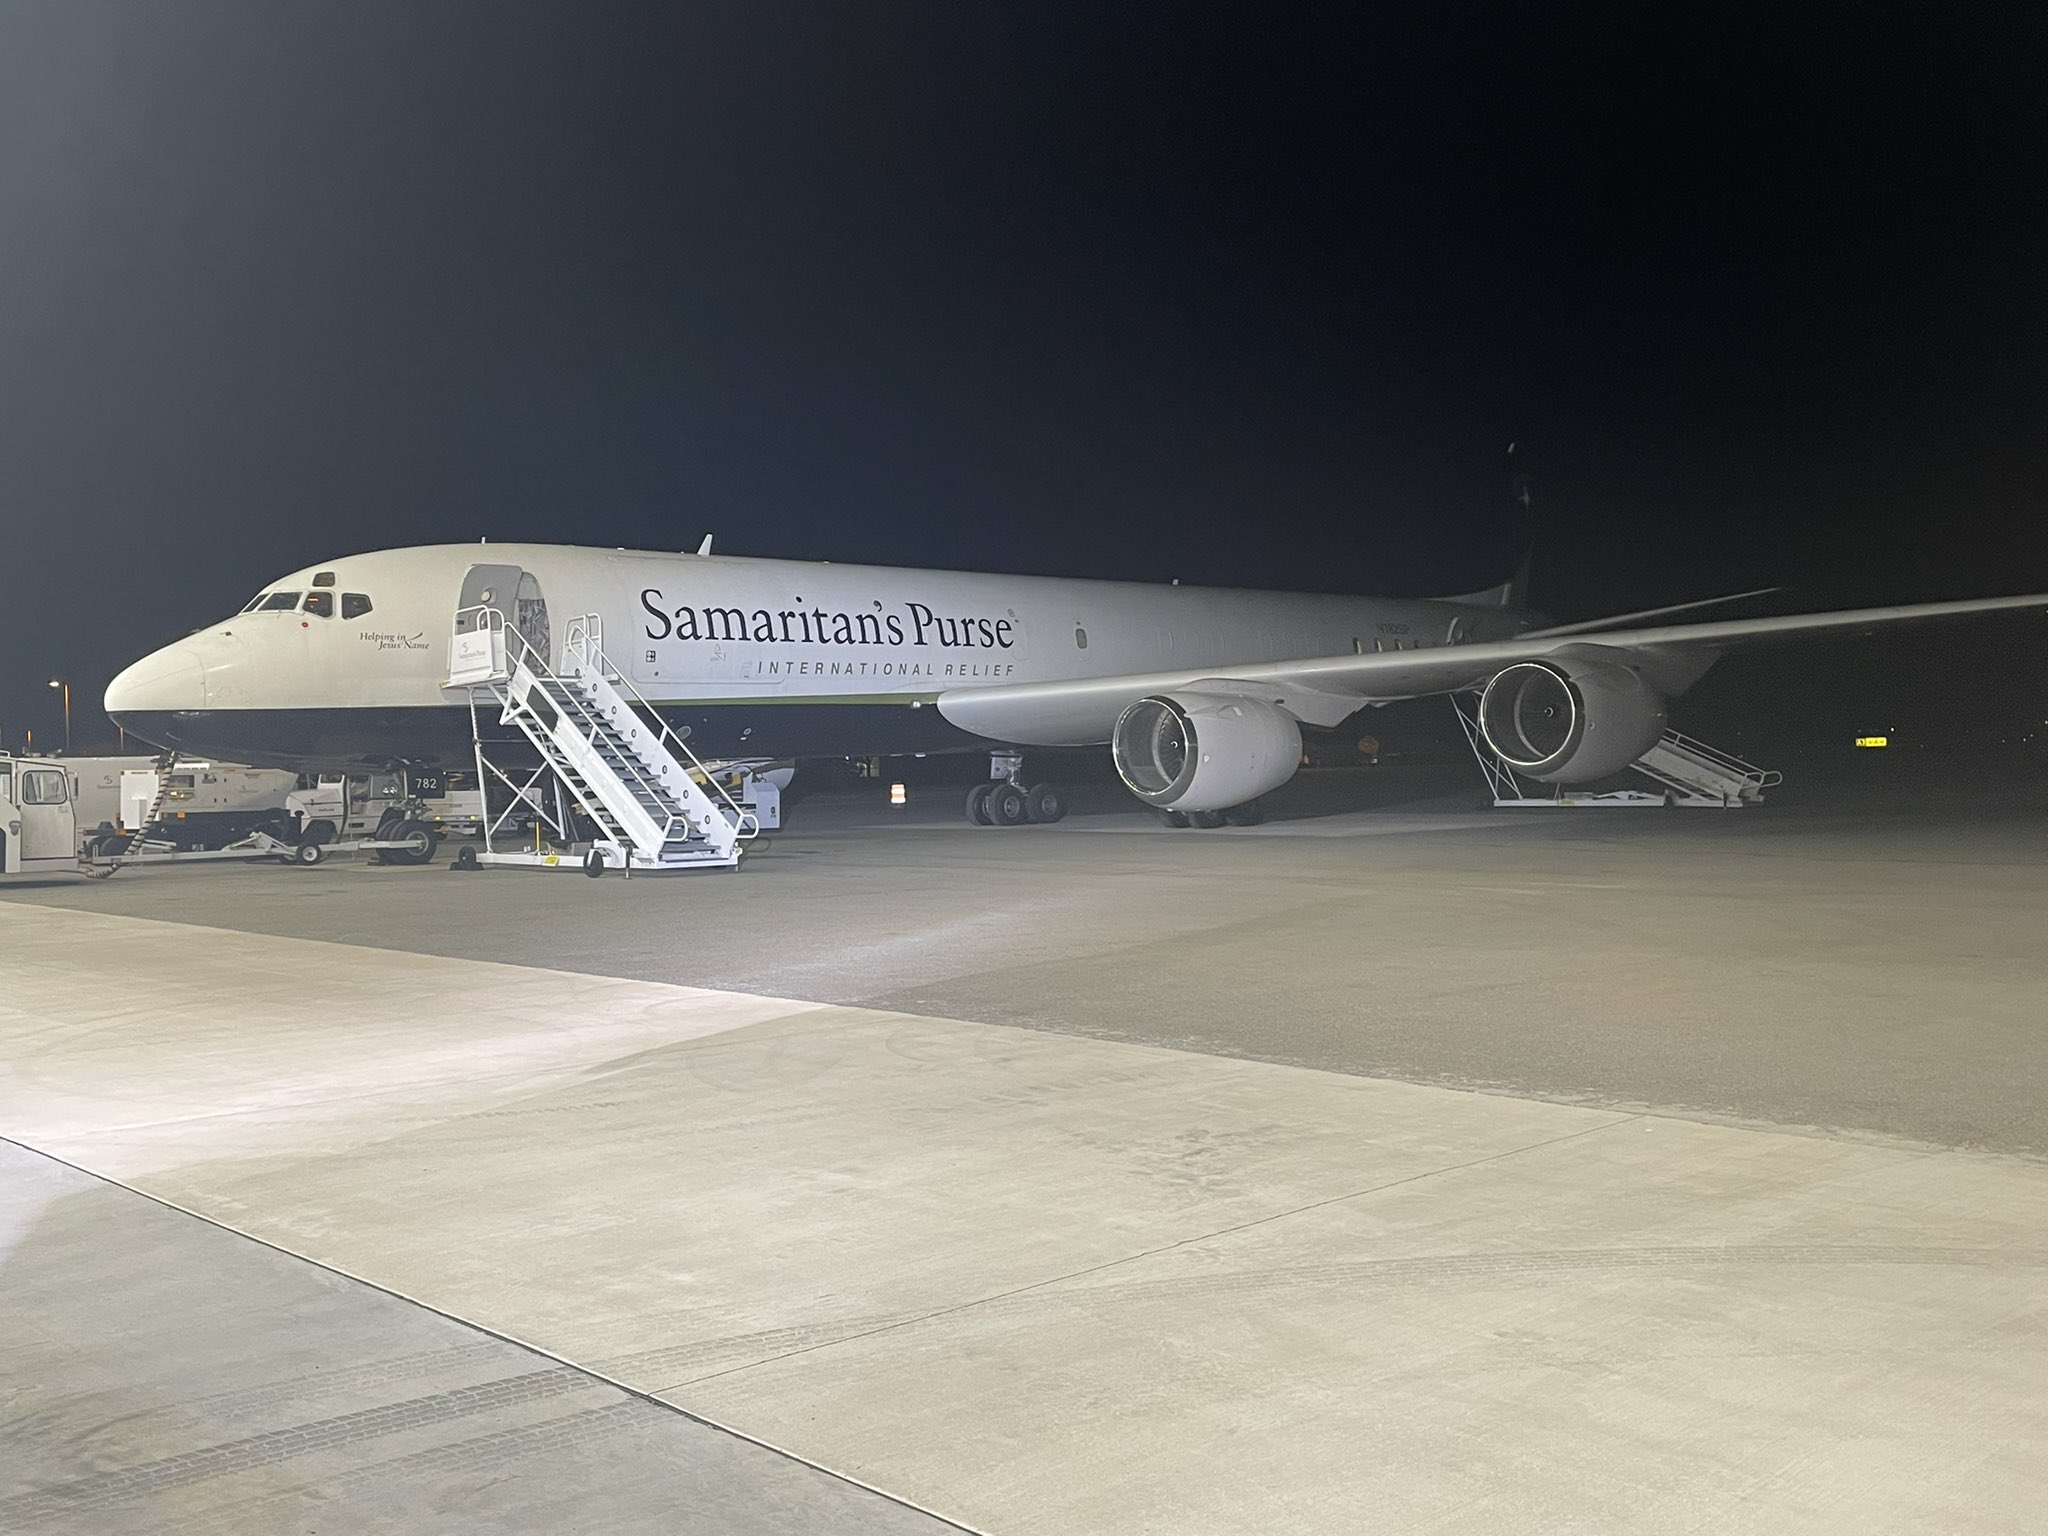 Samaritan's Purse flight is loaded with aid workers and field hospital supplies, Friday, March 4, 2022 in Greensboro, N.C., headed for Poland. via Twitter